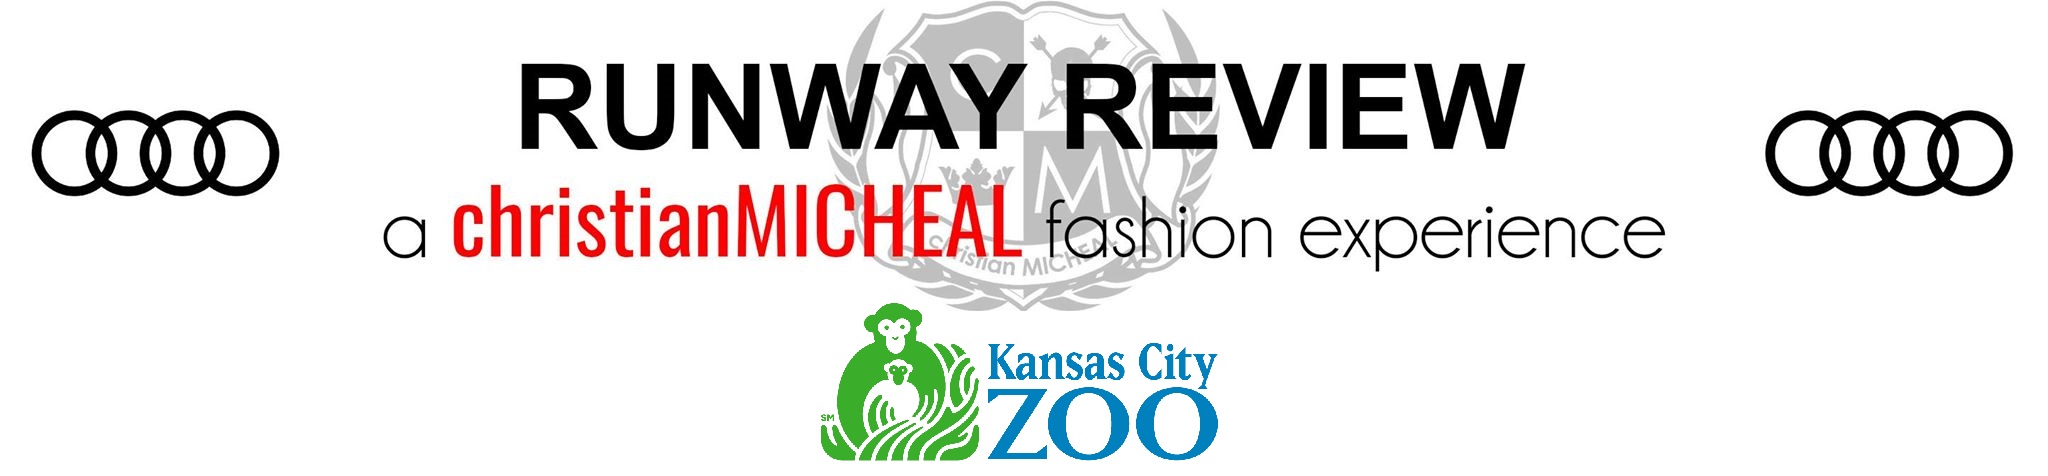 Runway Review KC | About